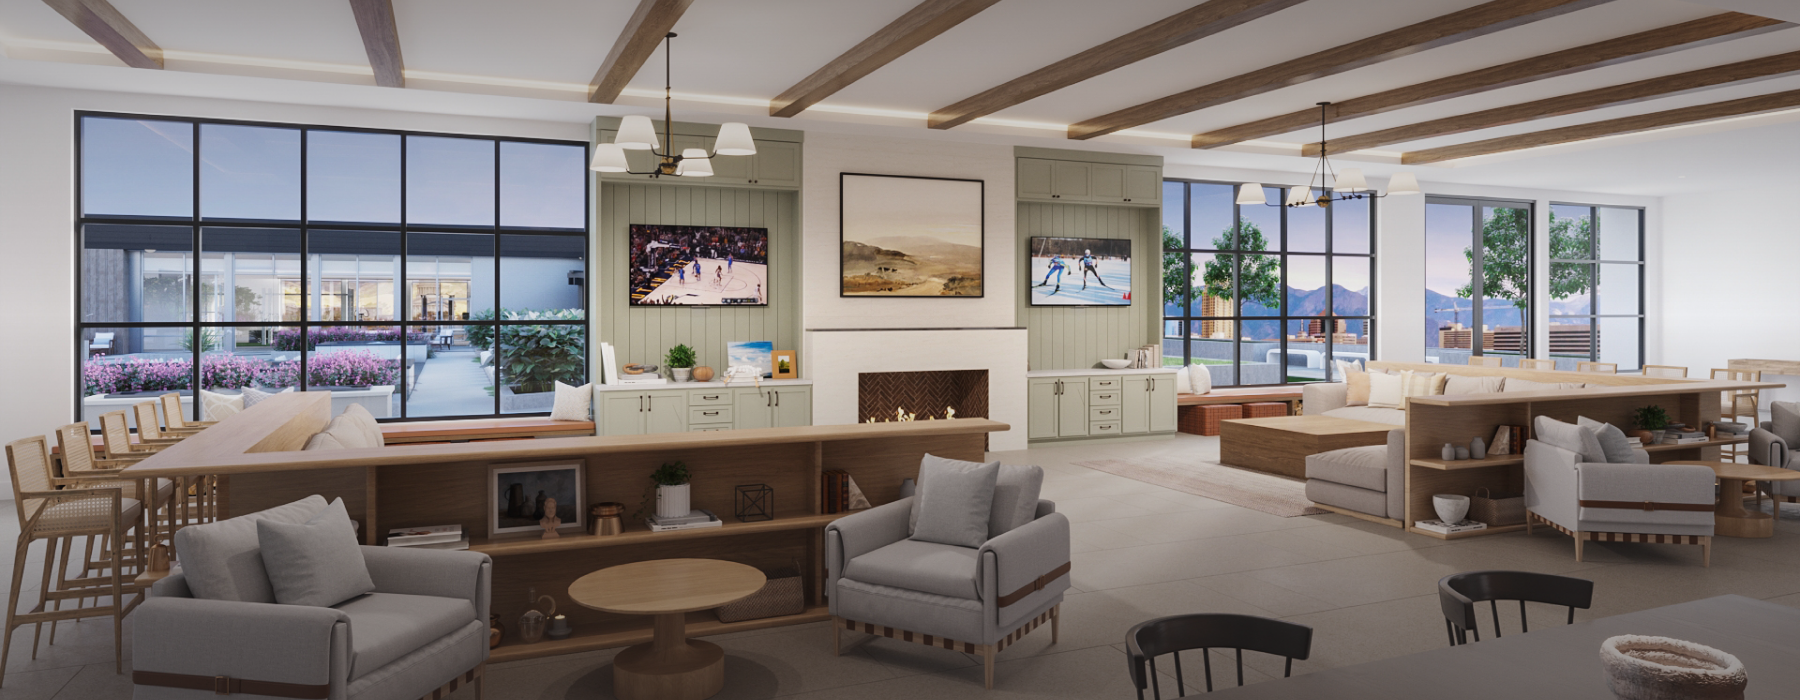 Resident clubhouse with ample seating, fireplace, demo kitchen and TVs